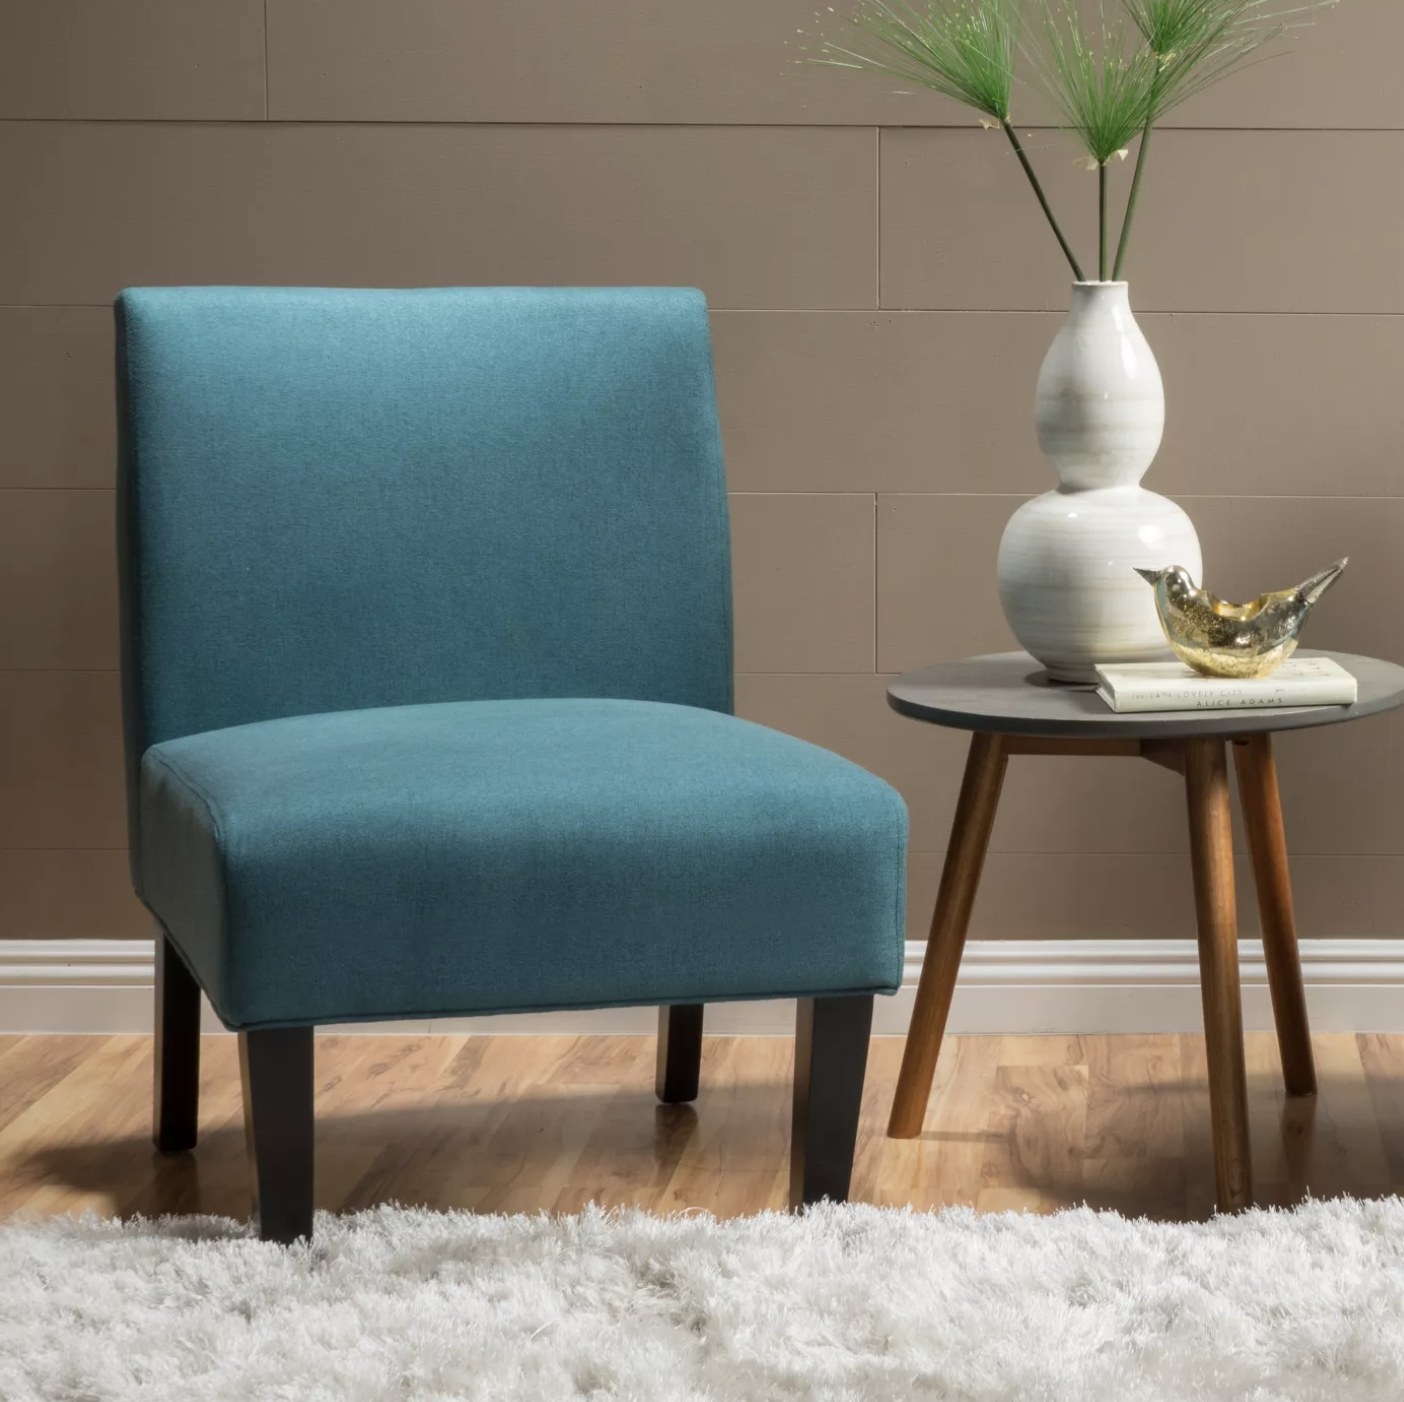 A dark teal accent chair in a living space